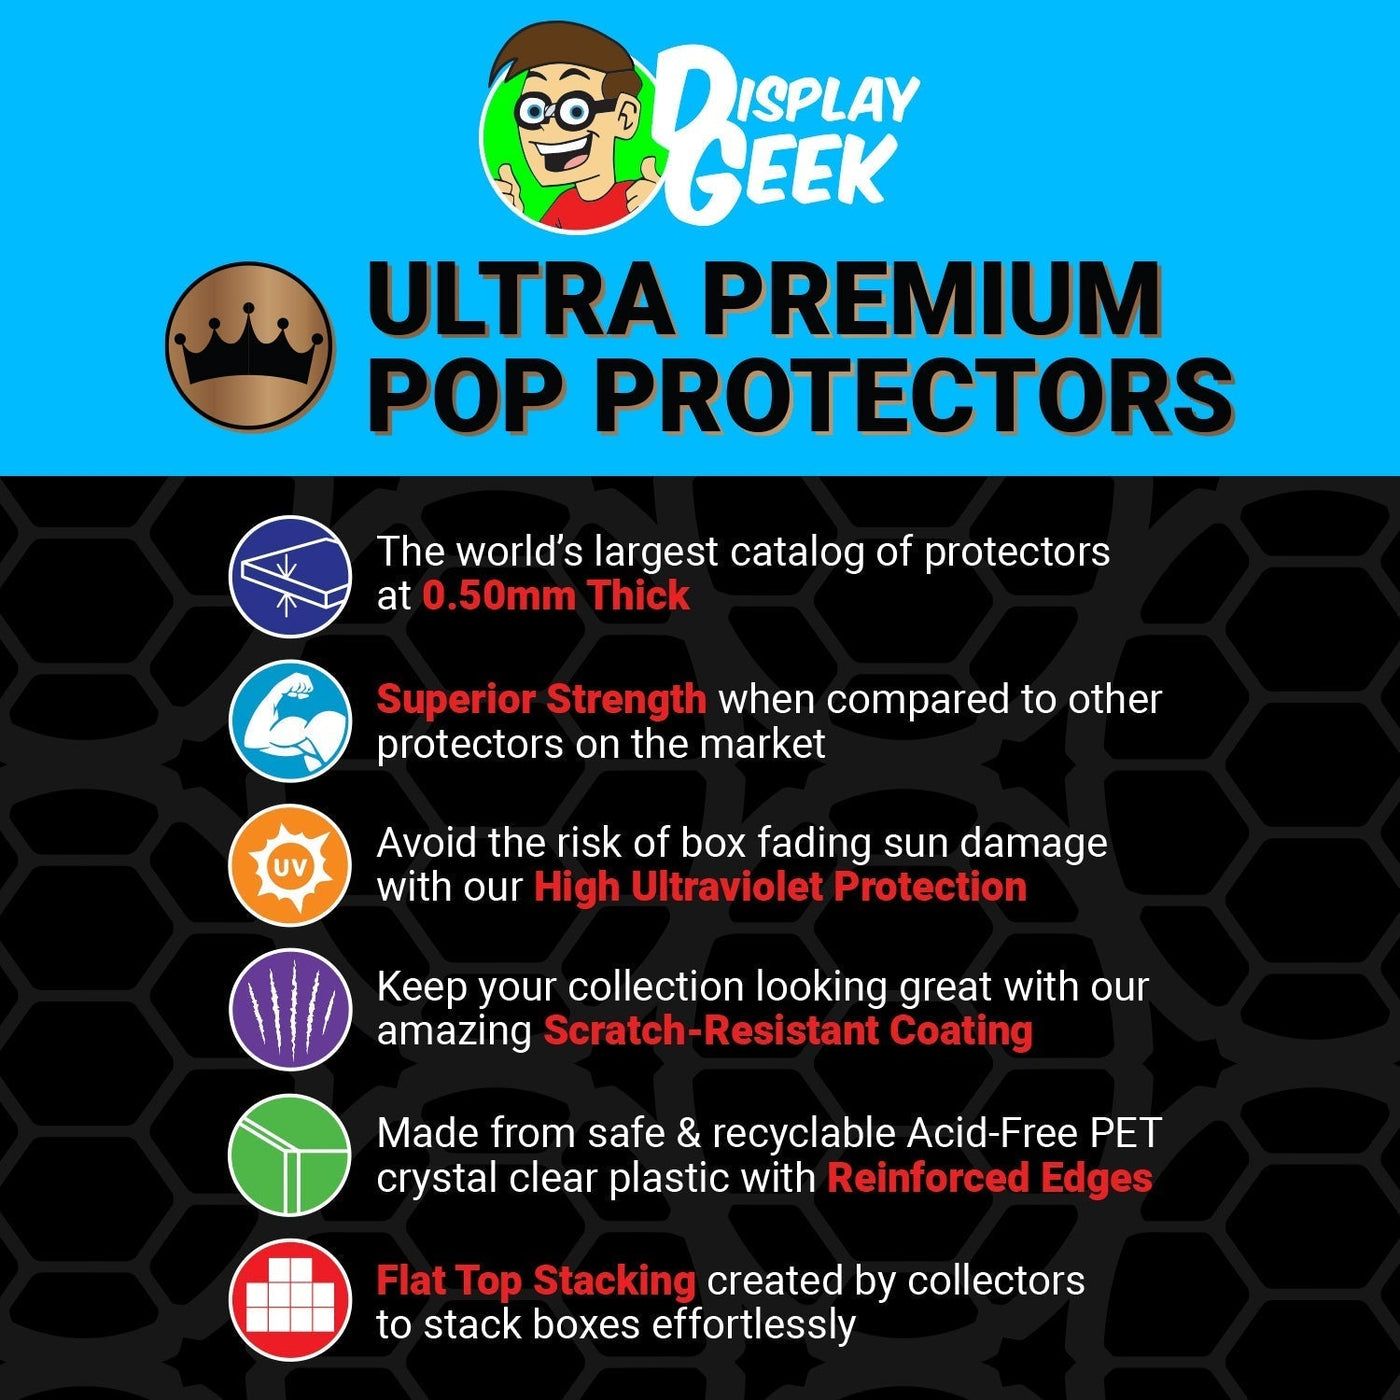 Pop Protector for 2 Pack Batman vs Superman Dawn of Justice Glow Funko Pop on The Protector Guide App by Display Geek